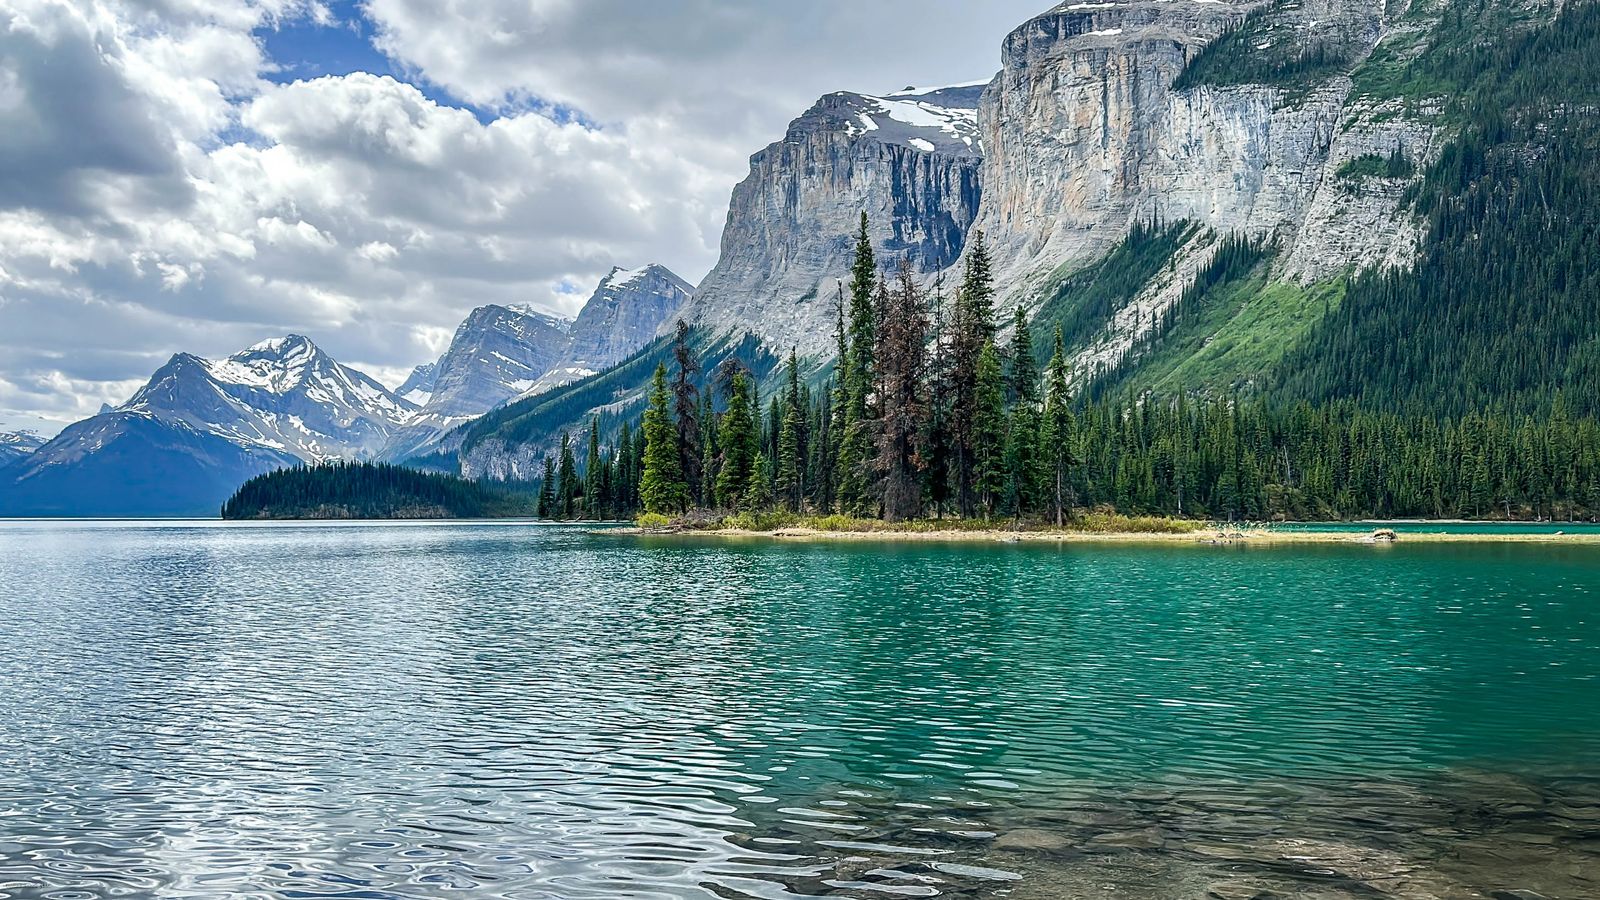 Spirit Island with Turquoise waters among mountains - Best places to visit in Jasper National Park